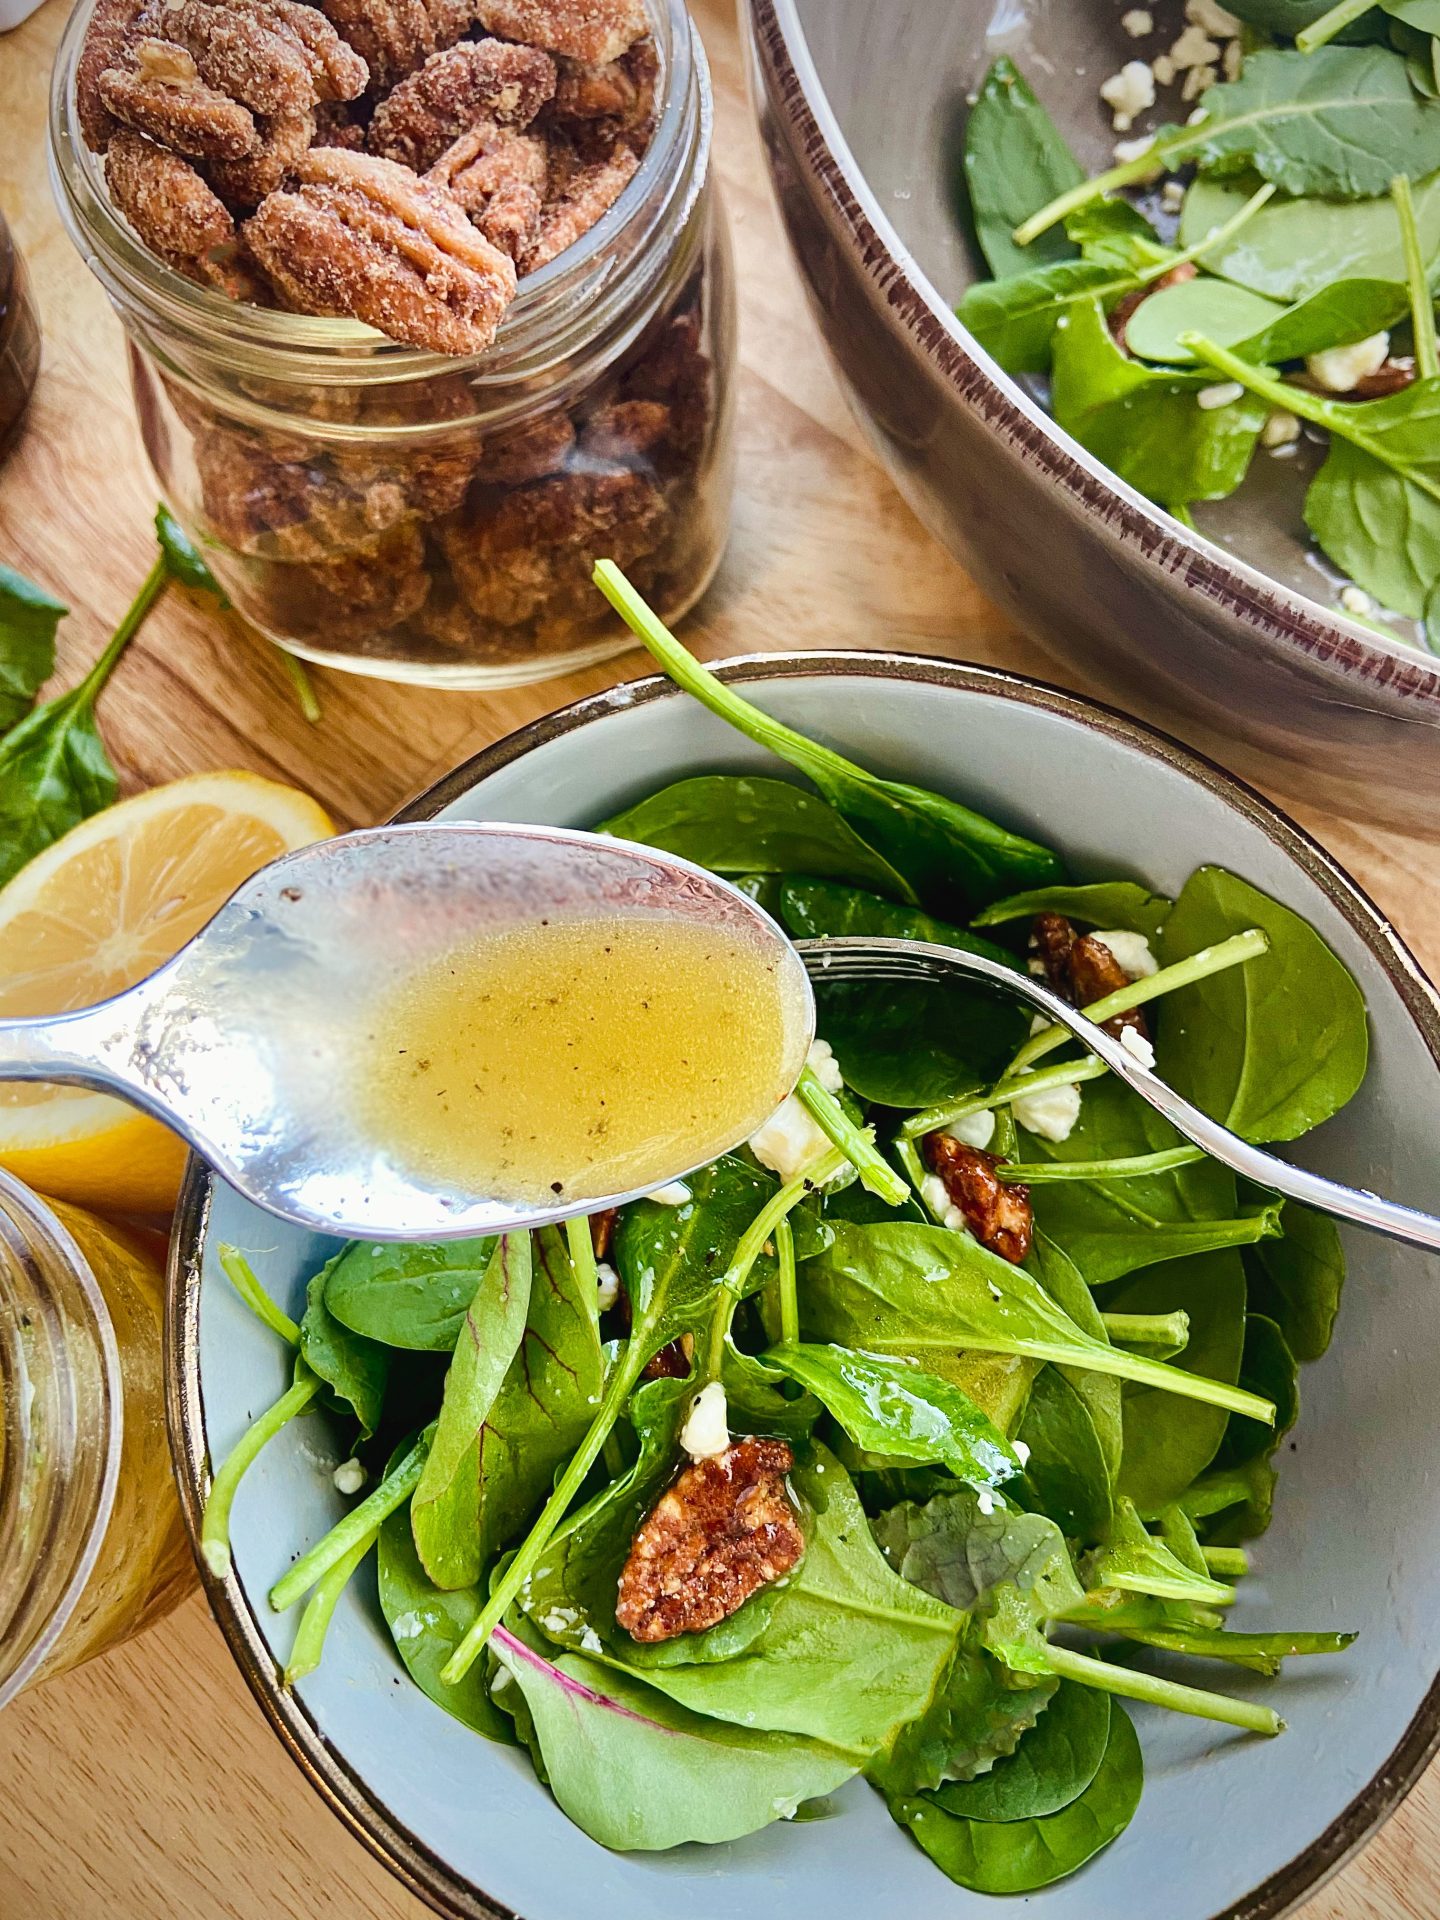 Overhead shot of a green salad with pecans and goat cheese. In the upper left corner is a jar of candied nuts and spoon filled with dressing hovers over the salad.